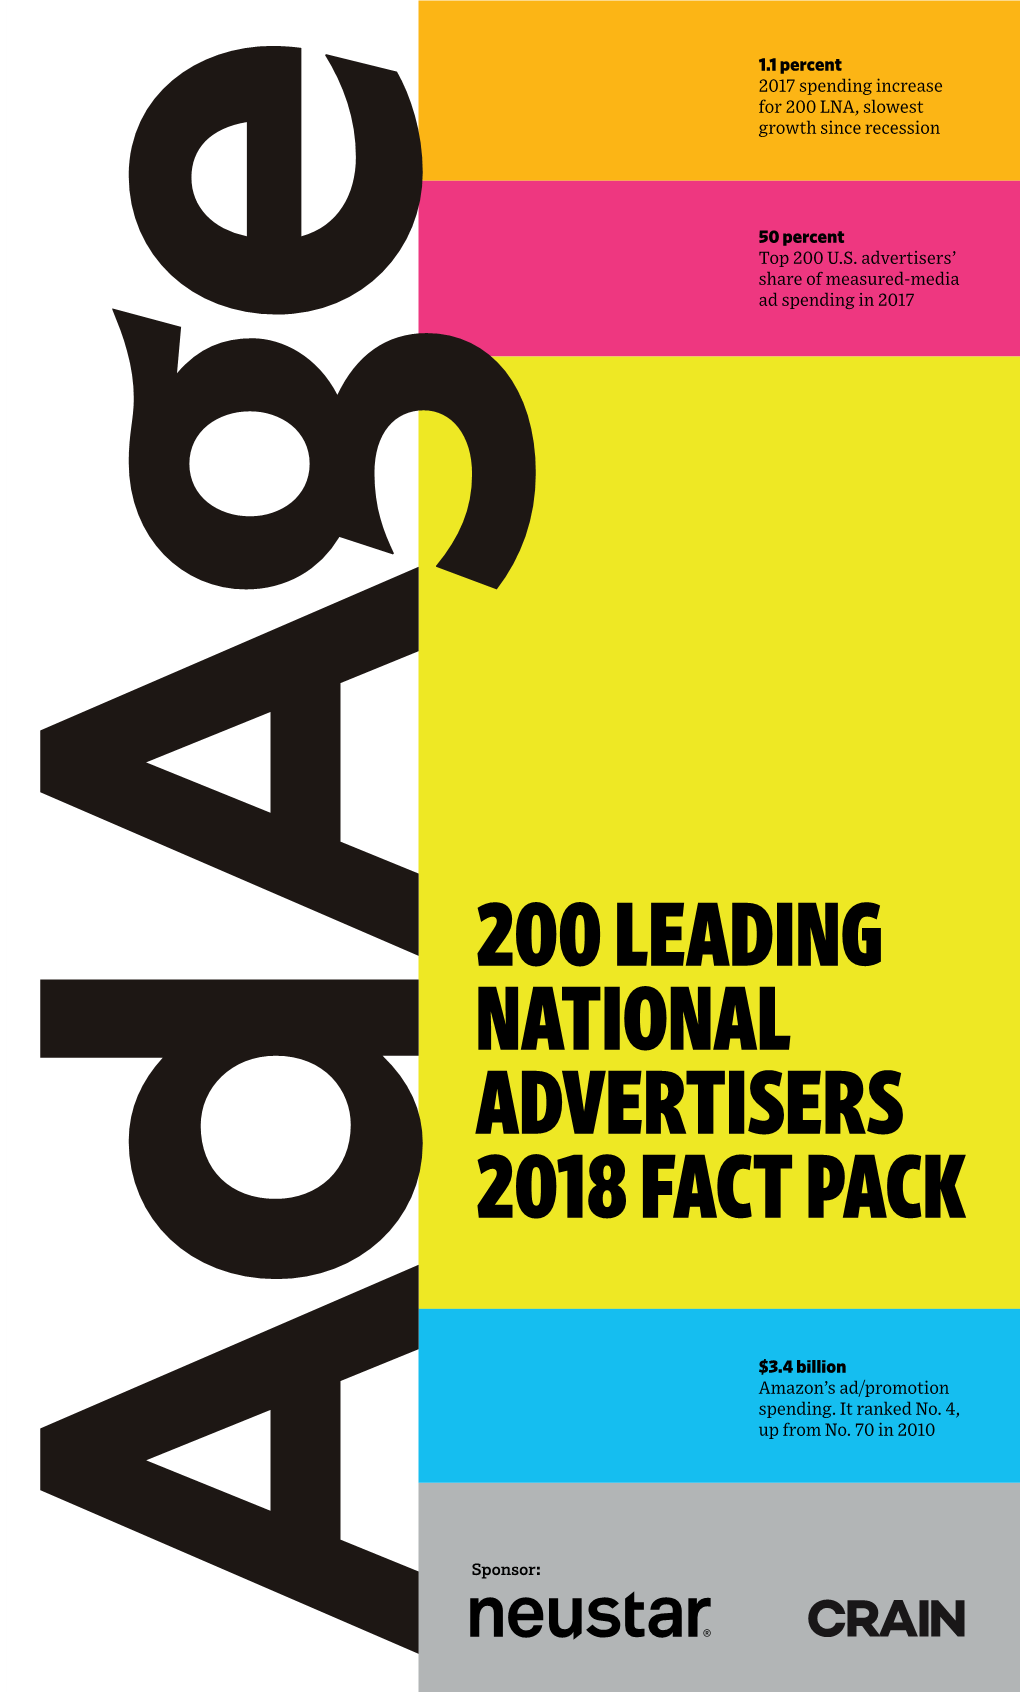 200 Leading National Advertisers 2018 Fact Pack